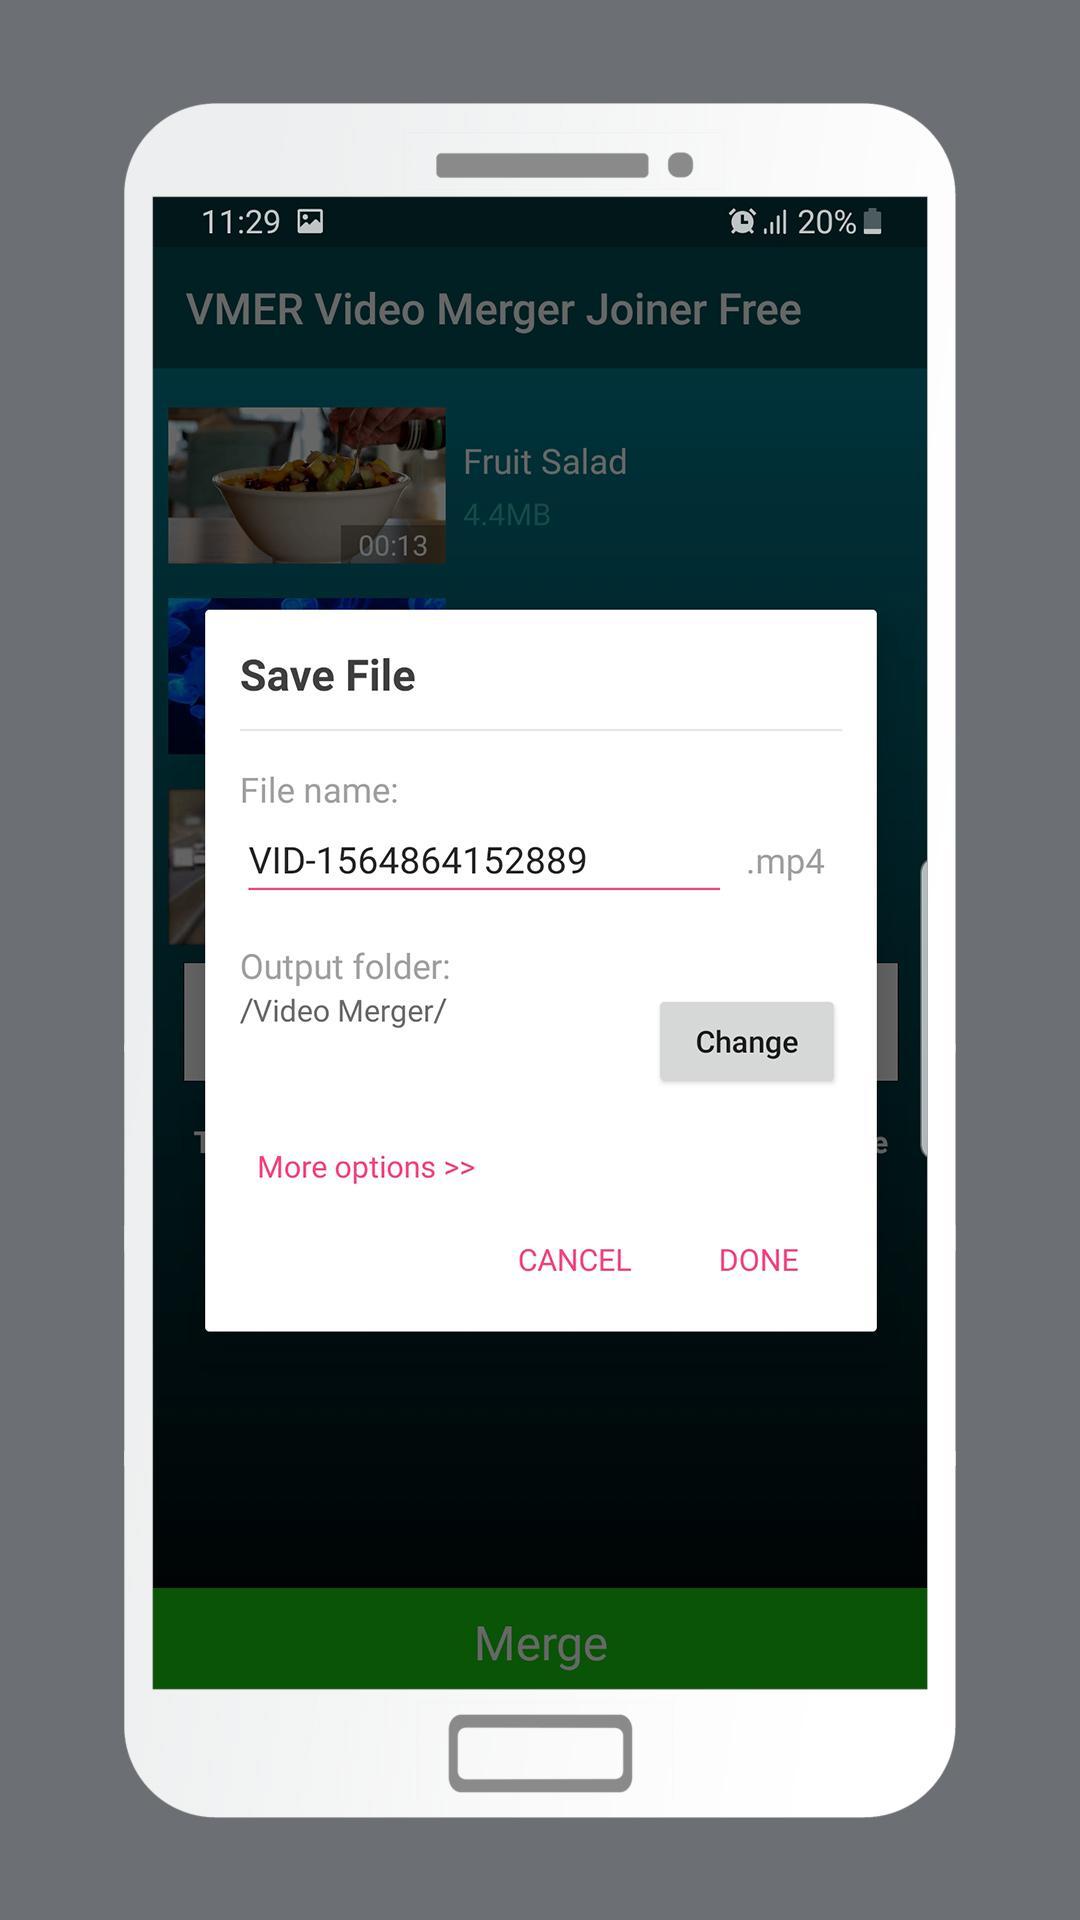 Vmer Video Merger Joiner Free For Android Apk Download